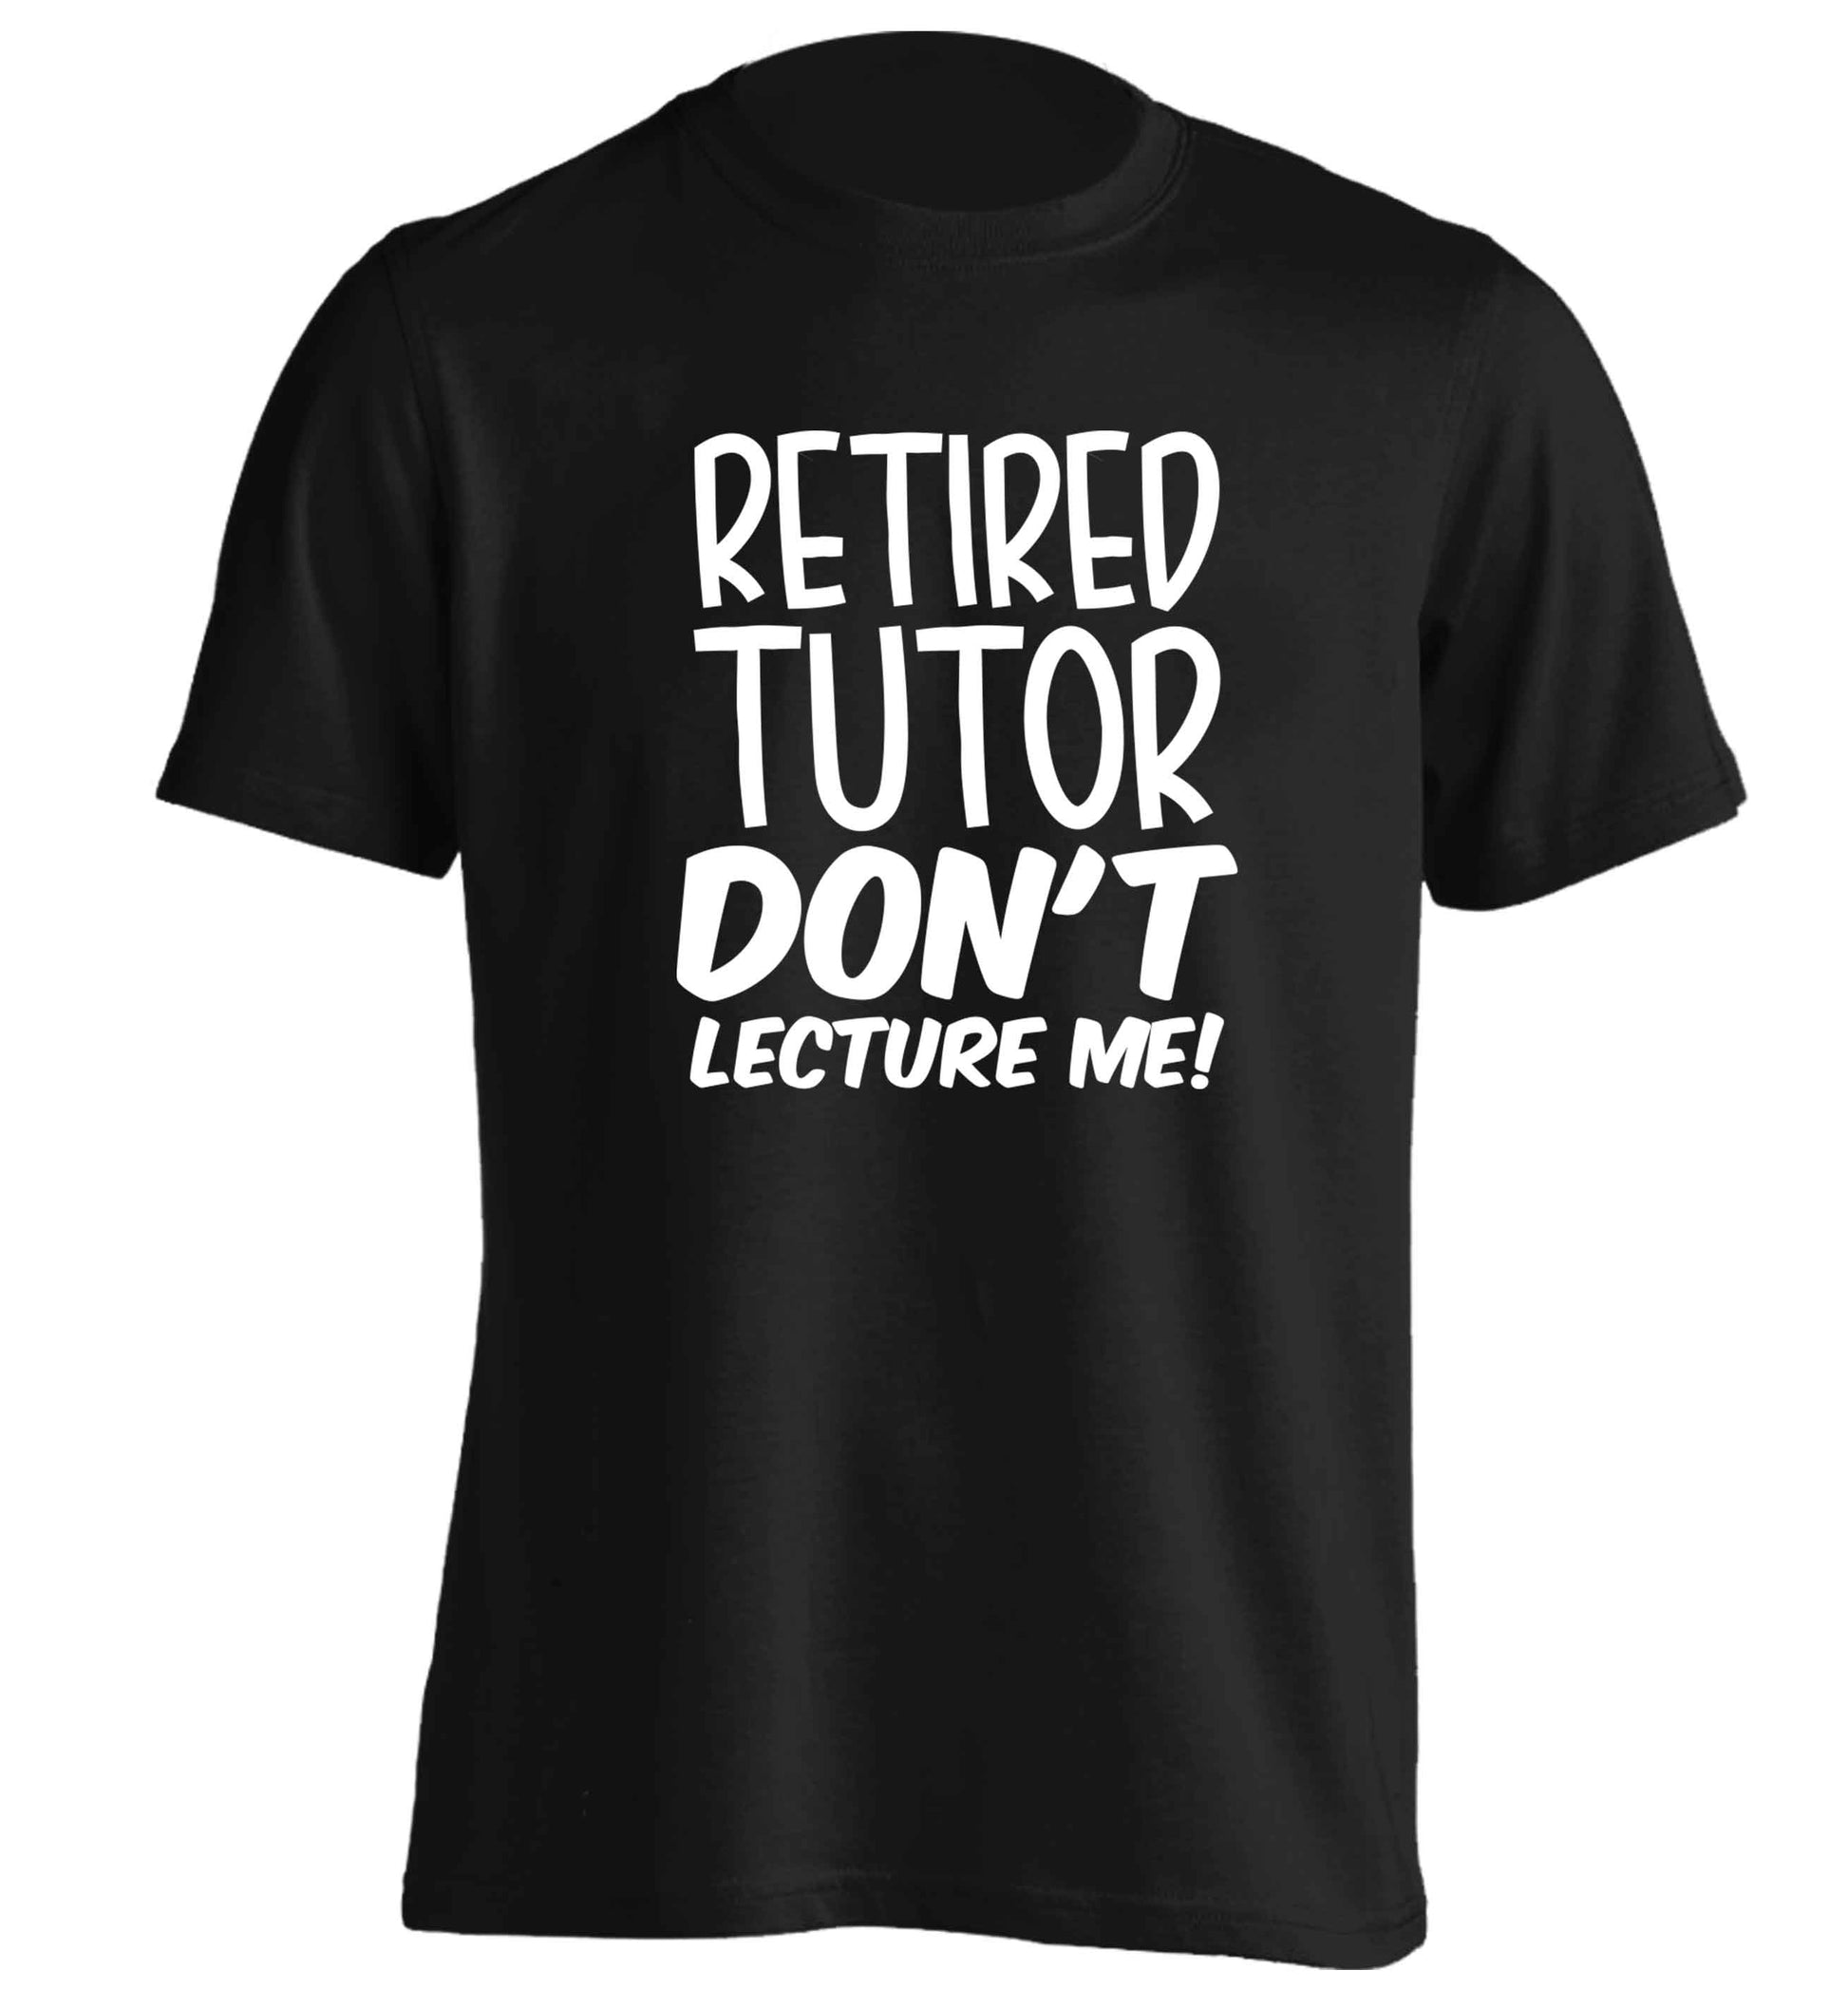 Retired tutor don't lecture me! adults unisex black Tshirt 2XL